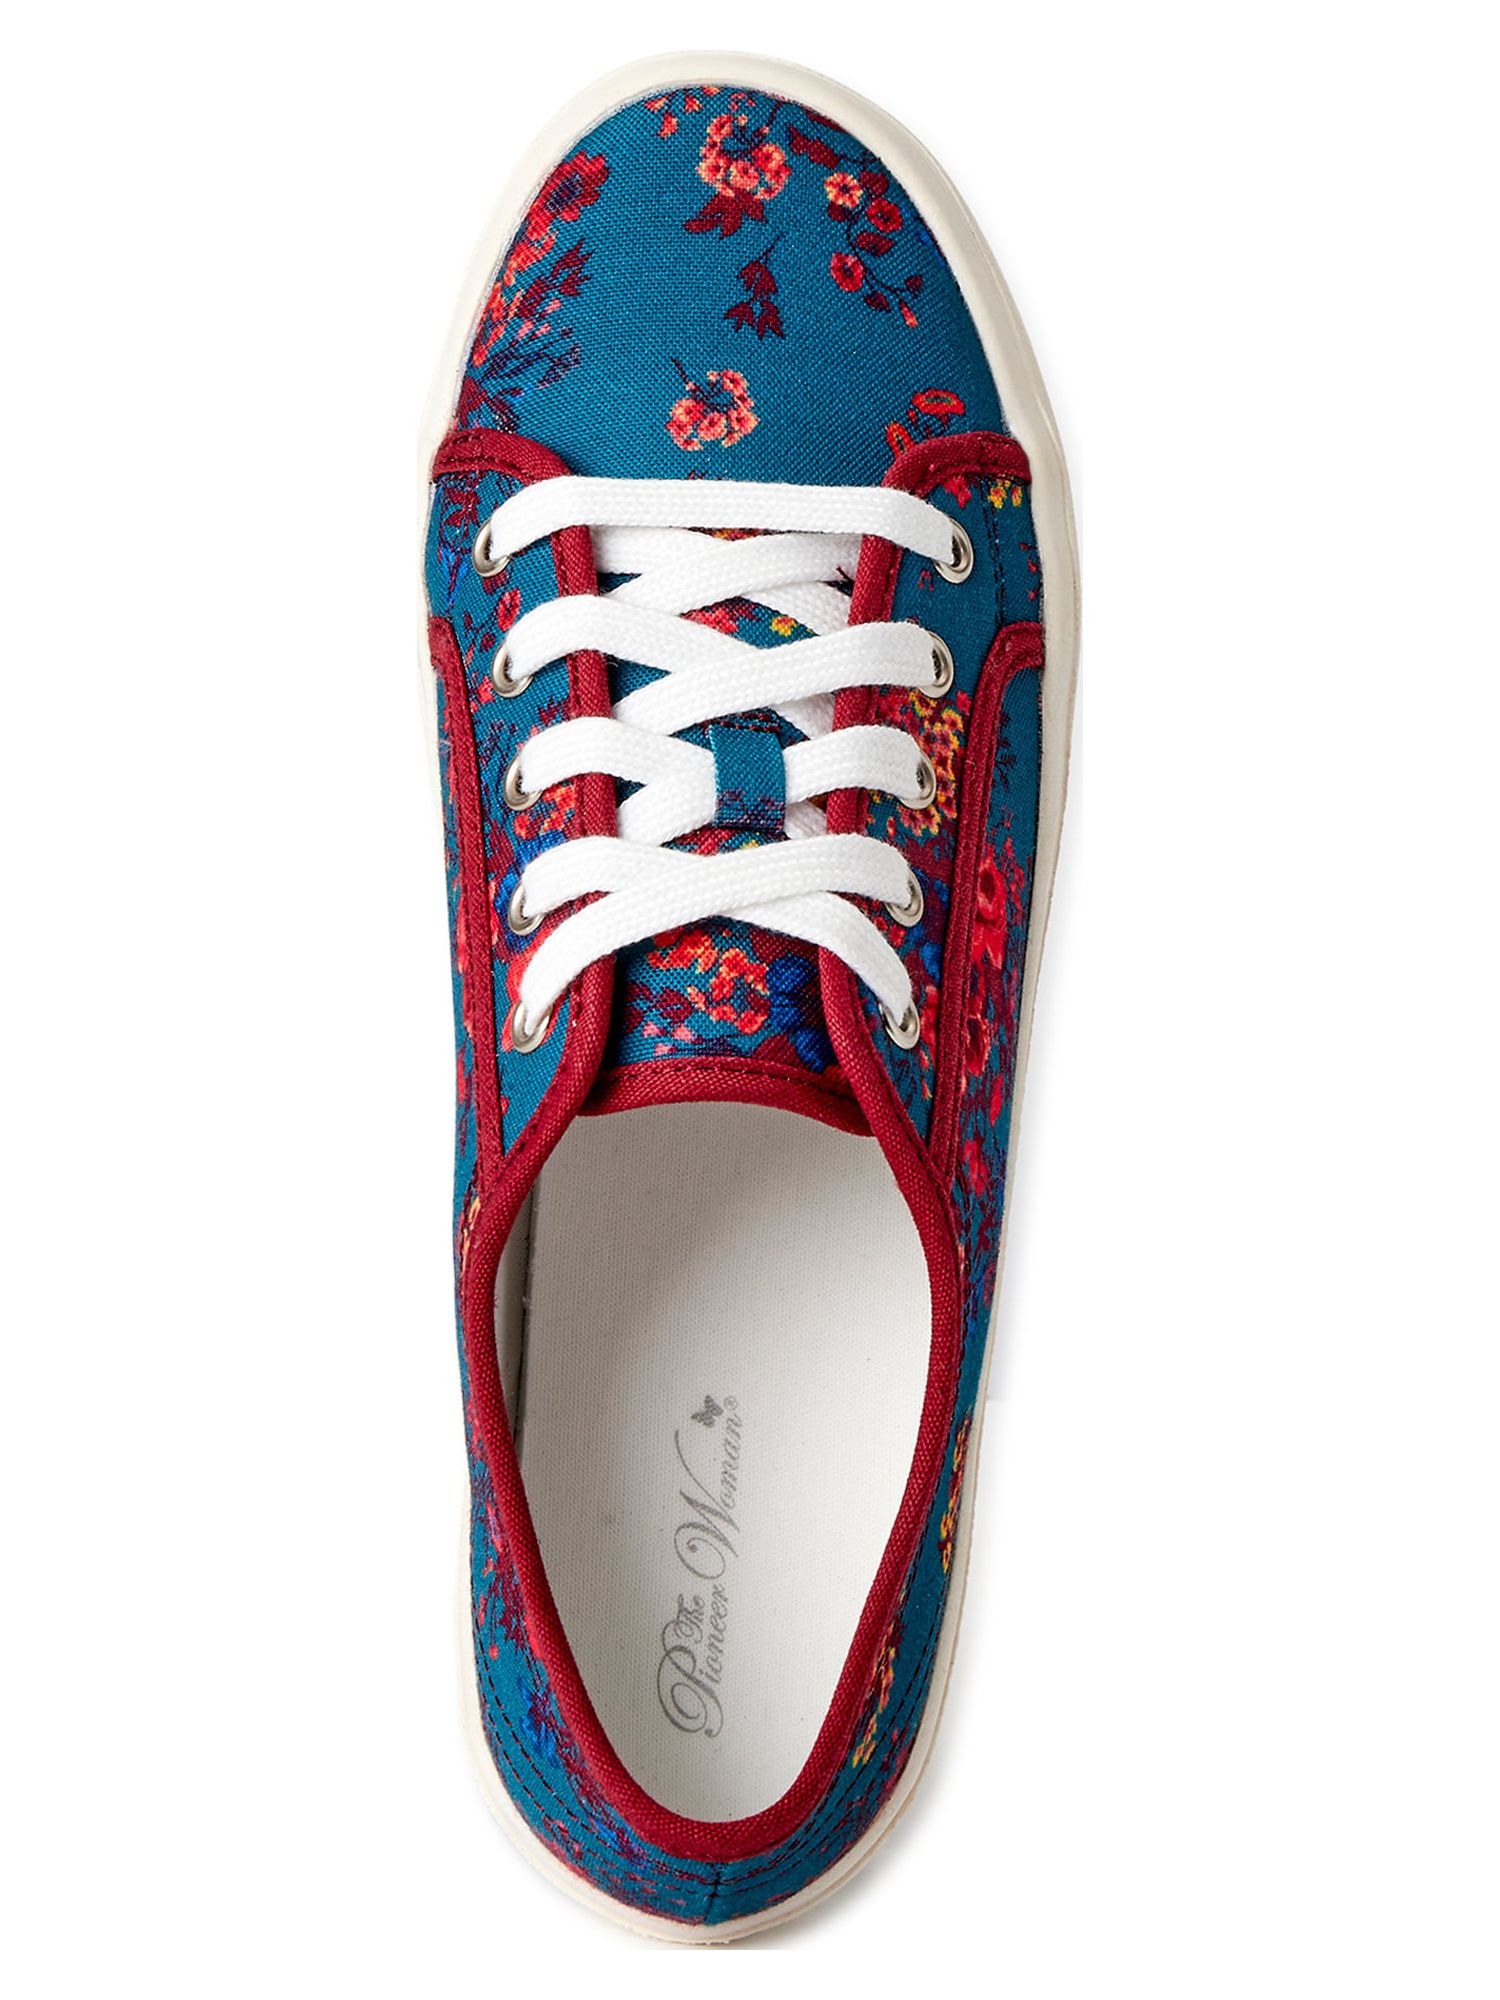 The Pioneer Woman Floral Sneakers, Women's - image 5 of 6